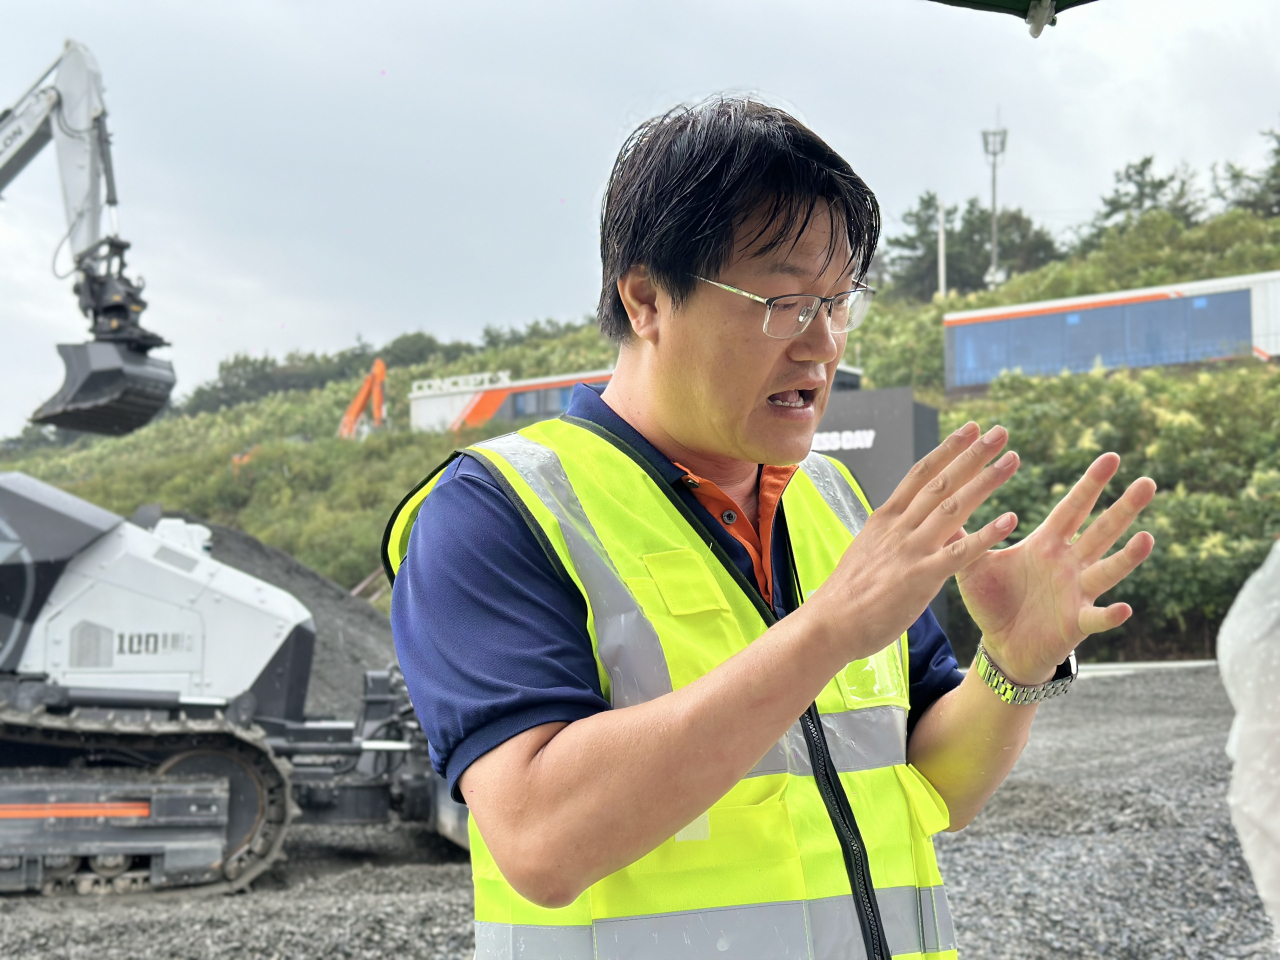 Kwon Yong-cheol, head of the Smart Excavator Technology Team, explains the mechanisms of Concept X-2 construction equipment to the group of reporters at the Boryeong Proving Ground on Wednesday. (Moon Joon Hyun/The Korea Herald)